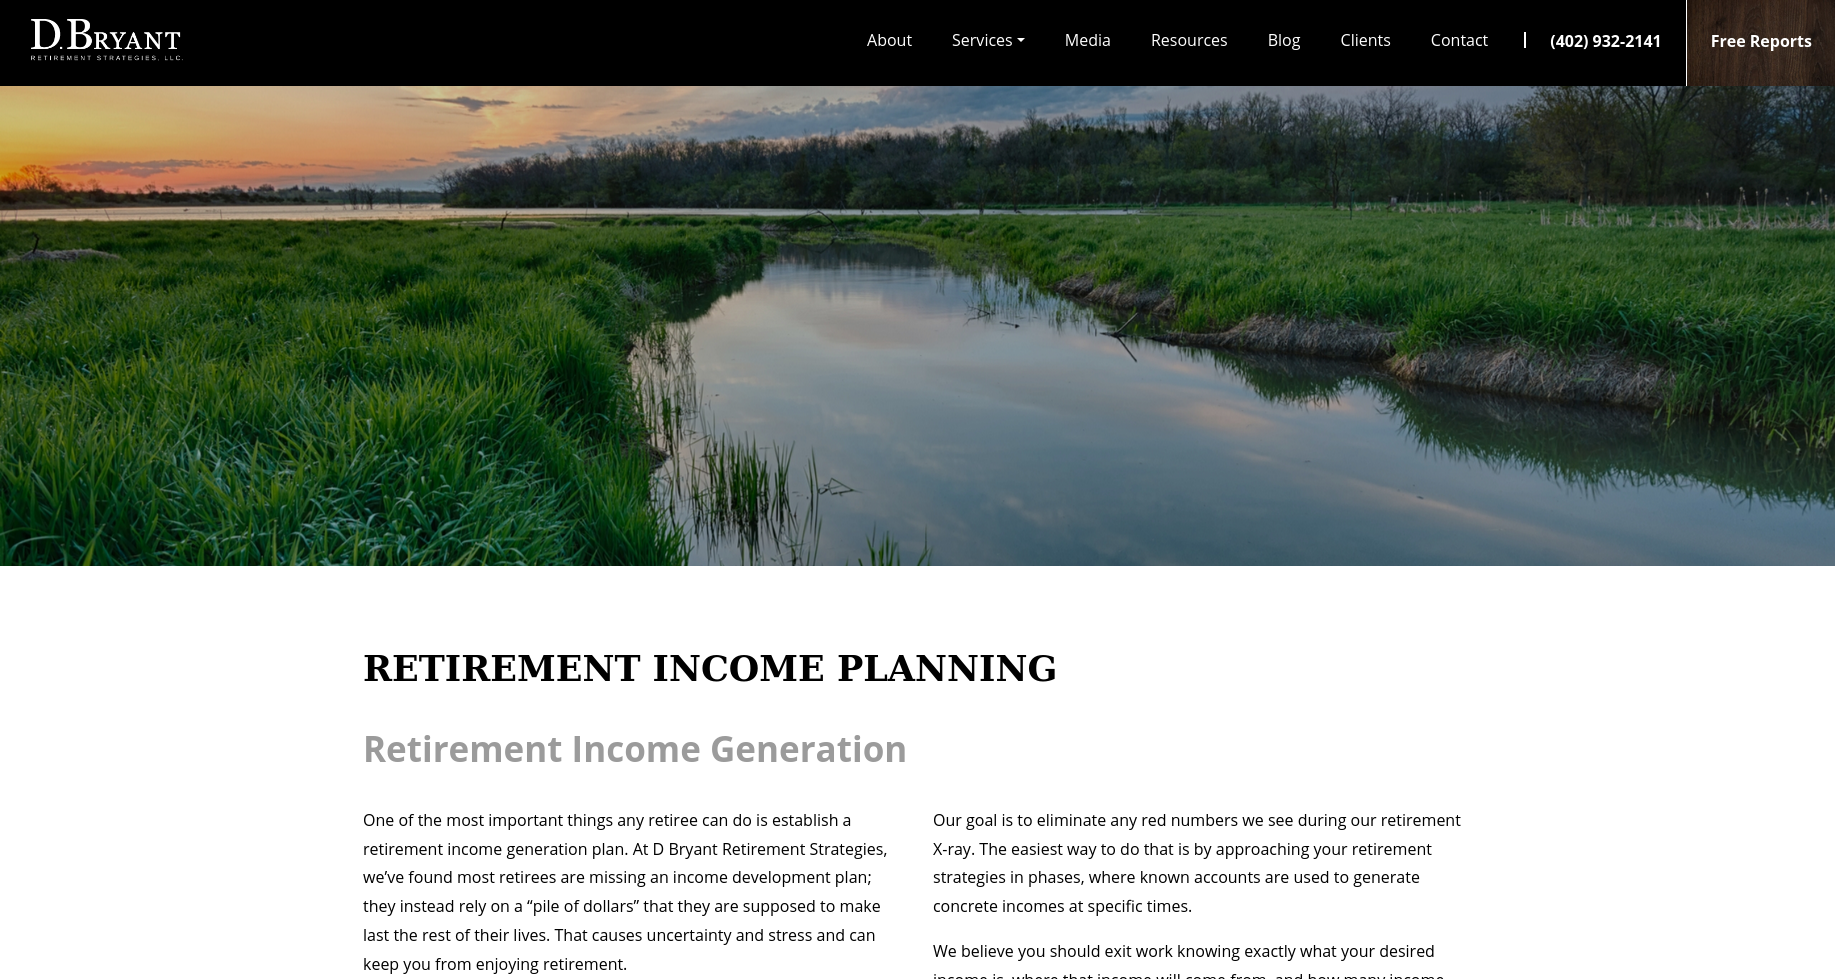 D_Bryant_Retirement_Strategies_Retirement_Income_Planning.png